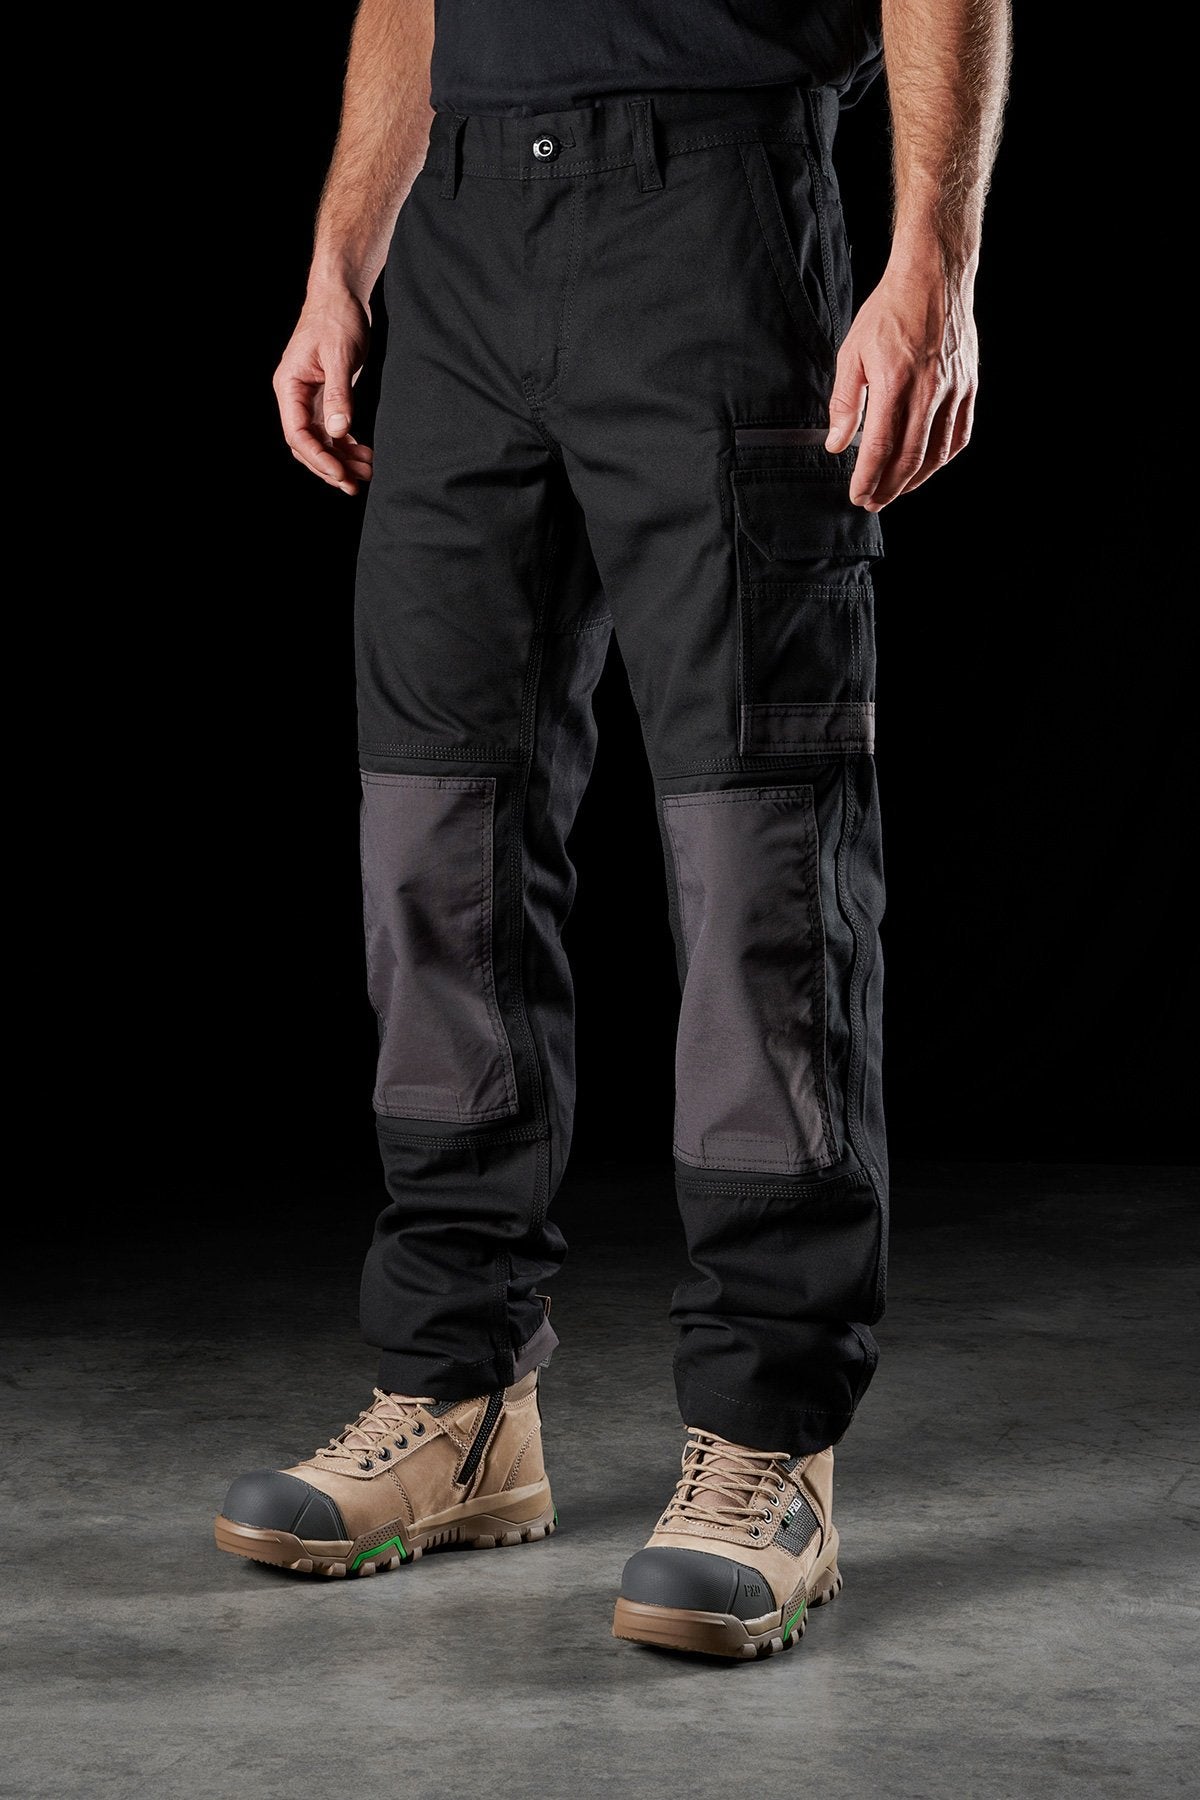 FXD WP-1 Work Pant at SafePak Workwear & Safety